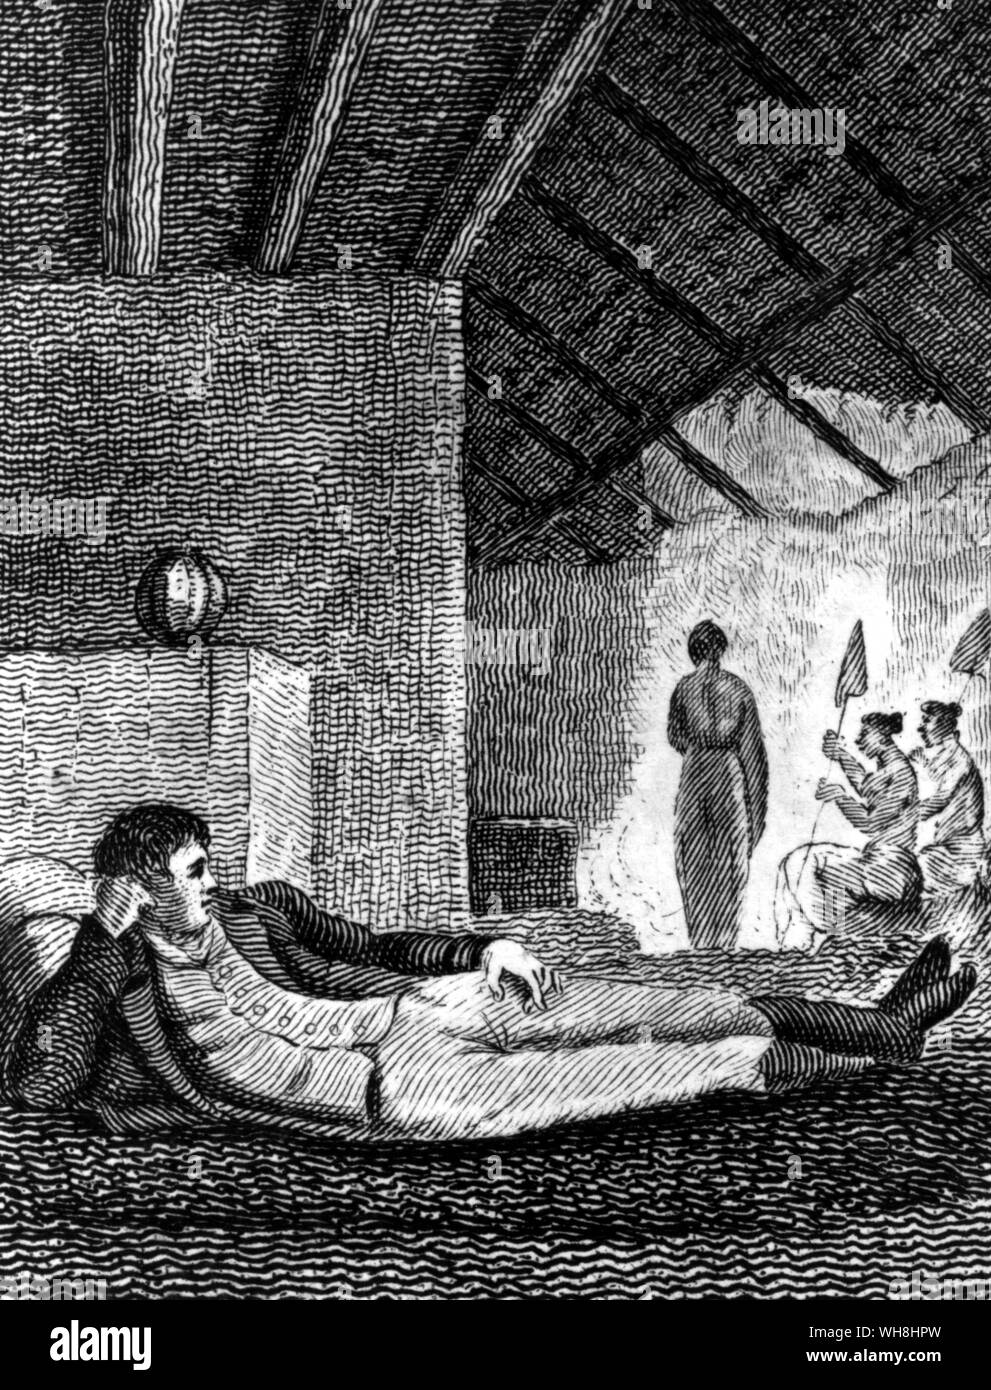 Romantic view of Mungo Park (1771-1806), Scottish African explorer and surgeon, from popular books of his day, resting in a tent. He found he had a way with native women who always treated him with great kindness. The African Adventure - A History of Africa's Explorers by Timothy Severin, page 88. Stock Photo